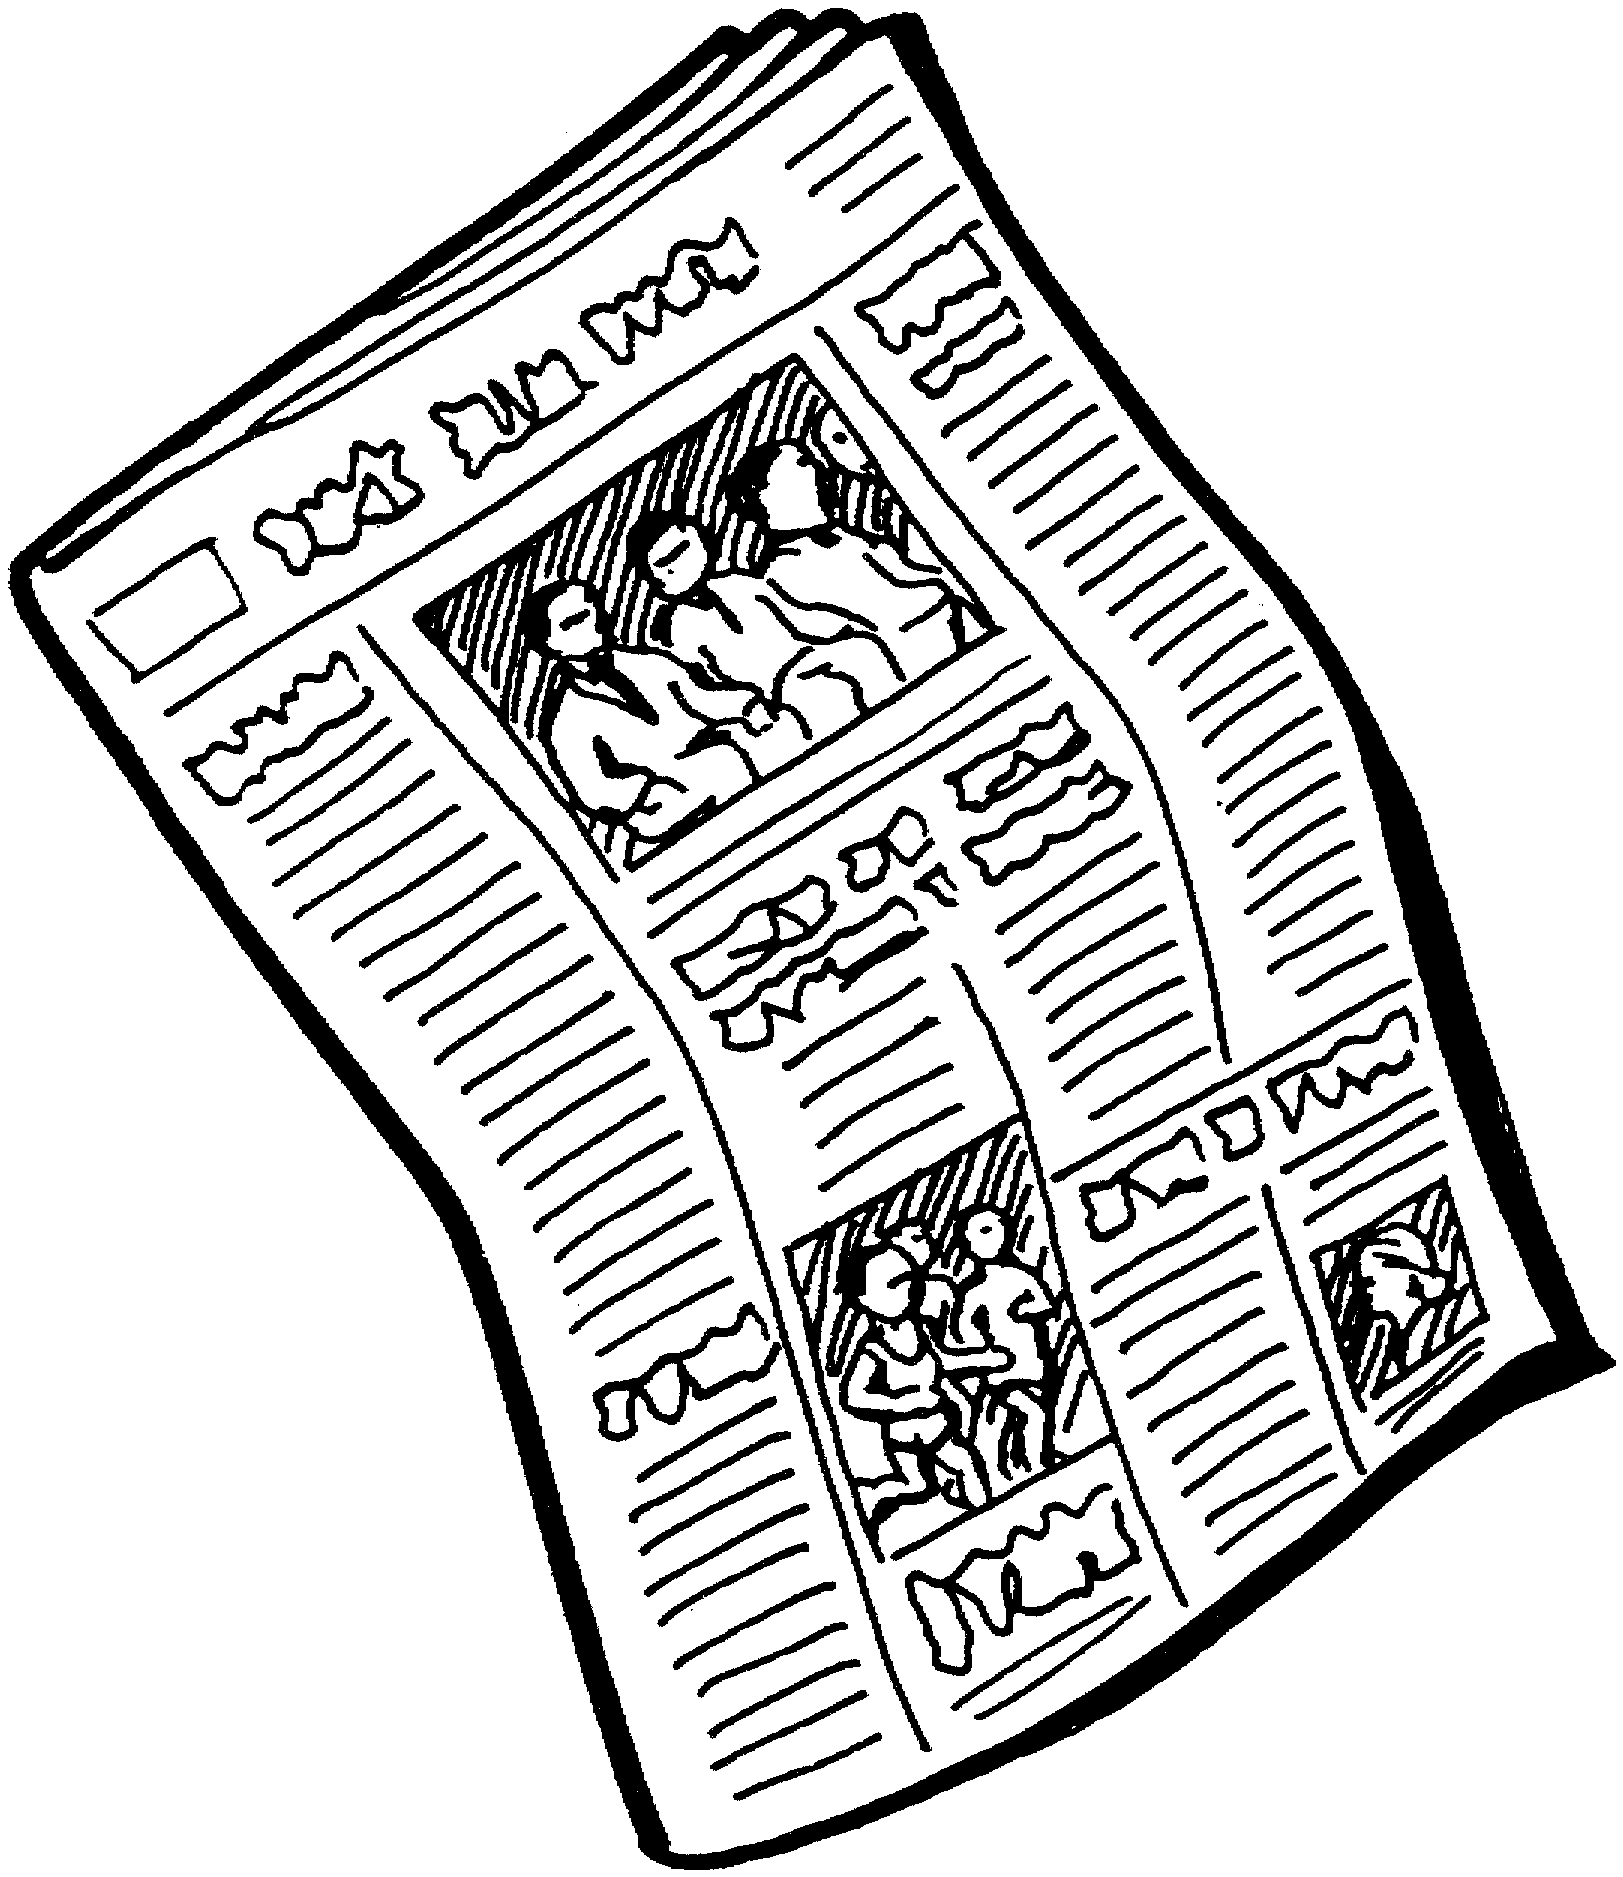 newspaper clipping clipart free - photo #13